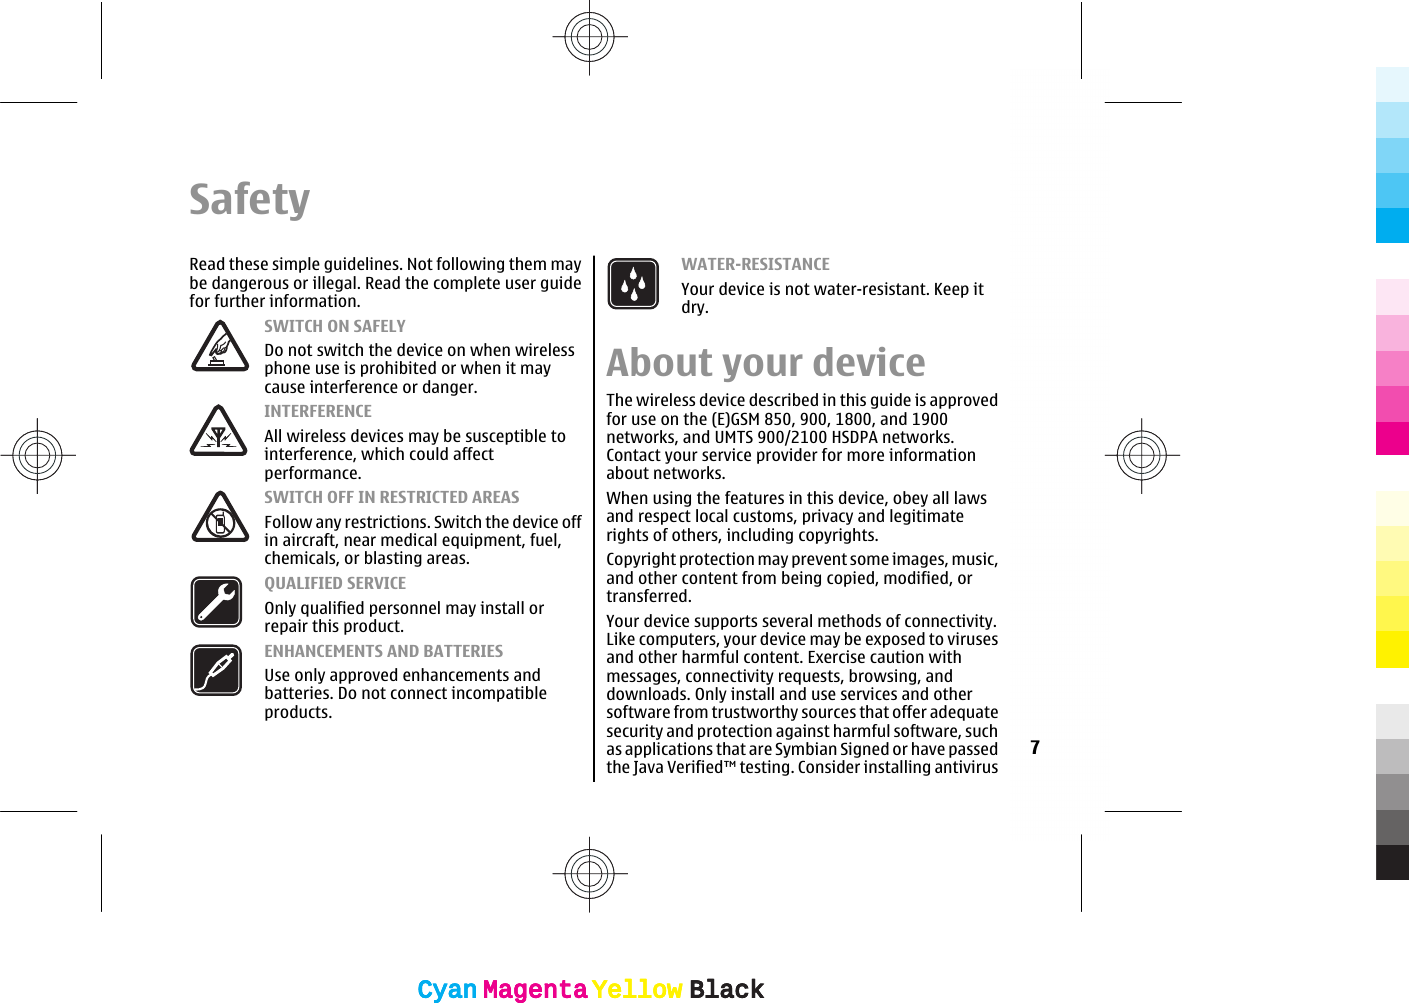 SafetyRead these simple guidelines. Not following them maybe dangerous or illegal. Read the complete user guidefor further information.SWITCH ON SAFELYDo not switch the device on when wirelessphone use is prohibited or when it maycause interference or danger.INTERFERENCEAll wireless devices may be susceptible tointerference, which could affectperformance.SWITCH OFF IN RESTRICTED AREASFollow any restrictions. Switch the device offin aircraft, near medical equipment, fuel,chemicals, or blasting areas.QUALIFIED SERVICEOnly qualified personnel may install orrepair this product.ENHANCEMENTS AND BATTERIESUse only approved enhancements andbatteries. Do not connect incompatibleproducts.WATER-RESISTANCEYour device is not water-resistant. Keep itdry.About your deviceThe wireless device described in this guide is approvedfor use on the (E)GSM 850, 900, 1800, and 1900networks, and UMTS 900/2100 HSDPA networks.Contact your service provider for more informationabout networks.When using the features in this device, obey all lawsand respect local customs, privacy and legitimaterights of others, including copyrights.Copyright protection may prevent some images, music,and other content from being copied, modified, ortransferred.Your device supports several methods of connectivity.Like computers, your device may be exposed to virusesand other harmful content. Exercise caution withmessages, connectivity requests, browsing, anddownloads. Only install and use services and othersoftware from trustworthy sources that offer adequatesecurity and protection against harmful software, suchas applications that are Symbian Signed or have passedthe Java Verified™ testing. Consider installing antivirus7CyanCyanMagentaMagentaYellowYellowBlackBlackCyanCyanMagentaMagentaYellowYellowBlackBlack